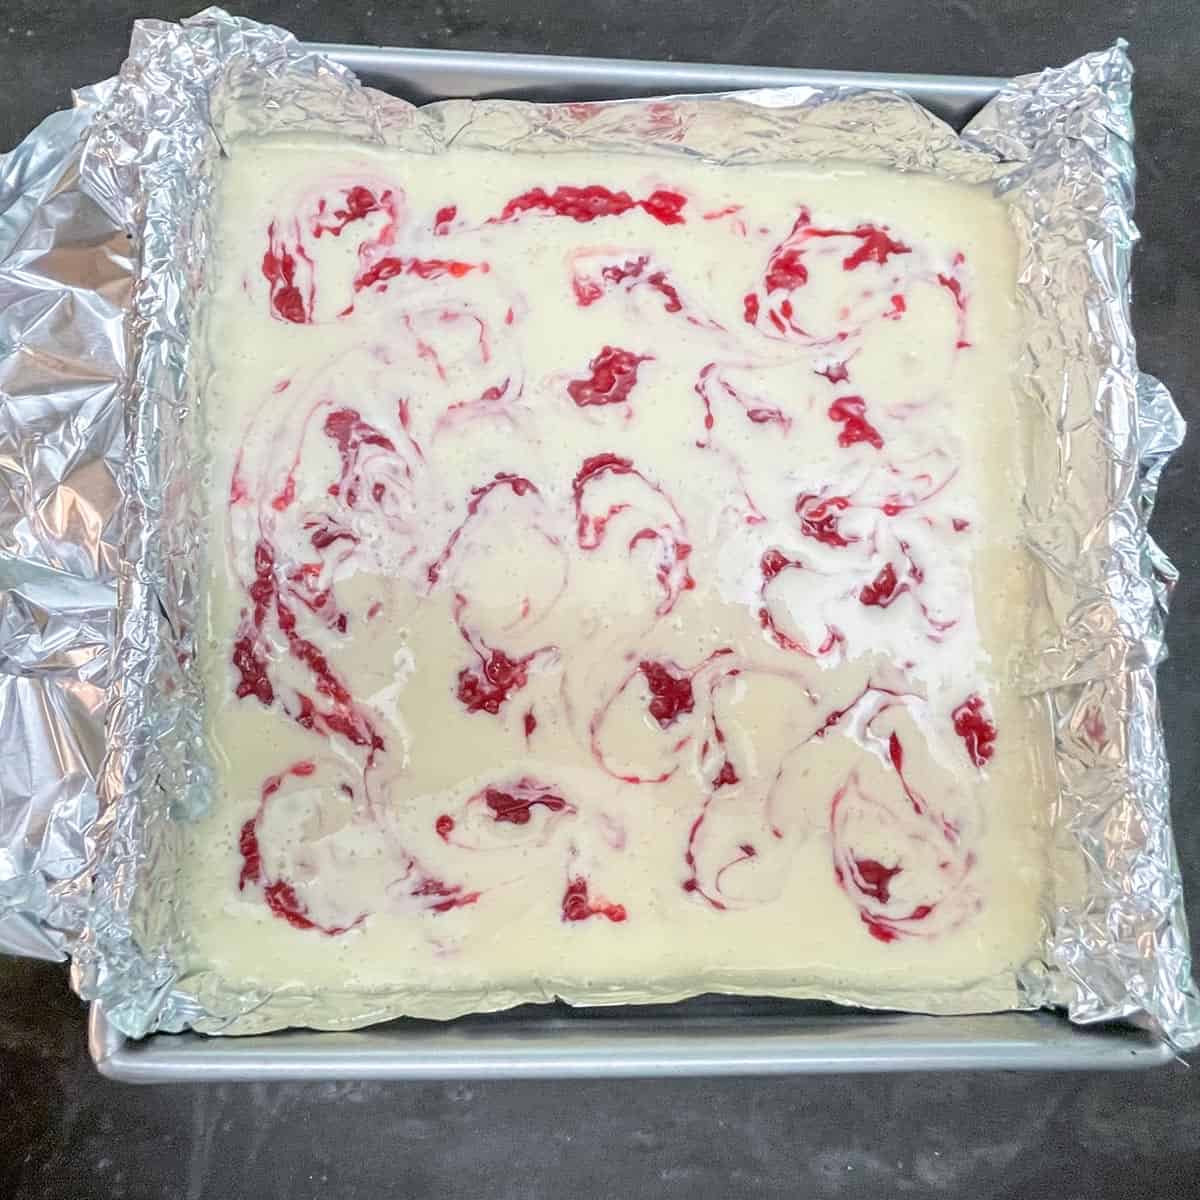 Raspberry jam swirled after the second round of dropping on the prebaked cheesecake.